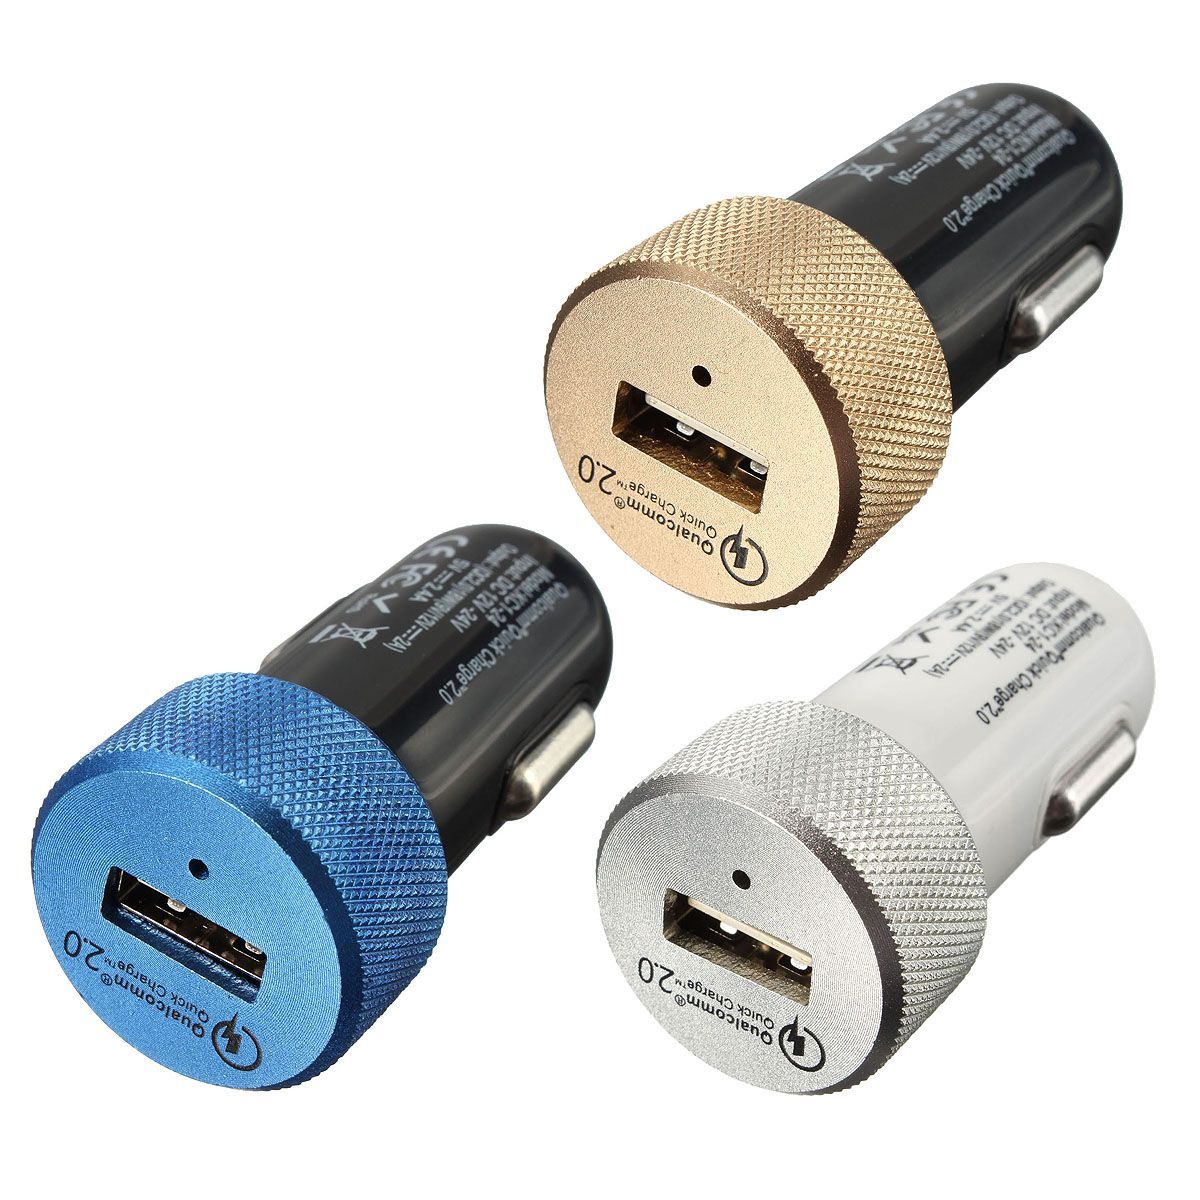 Gold-Blue-White-USB-Car-Charger-Quick-Charge-20-Adapter-For-Many-Mobile-Phone-1357137